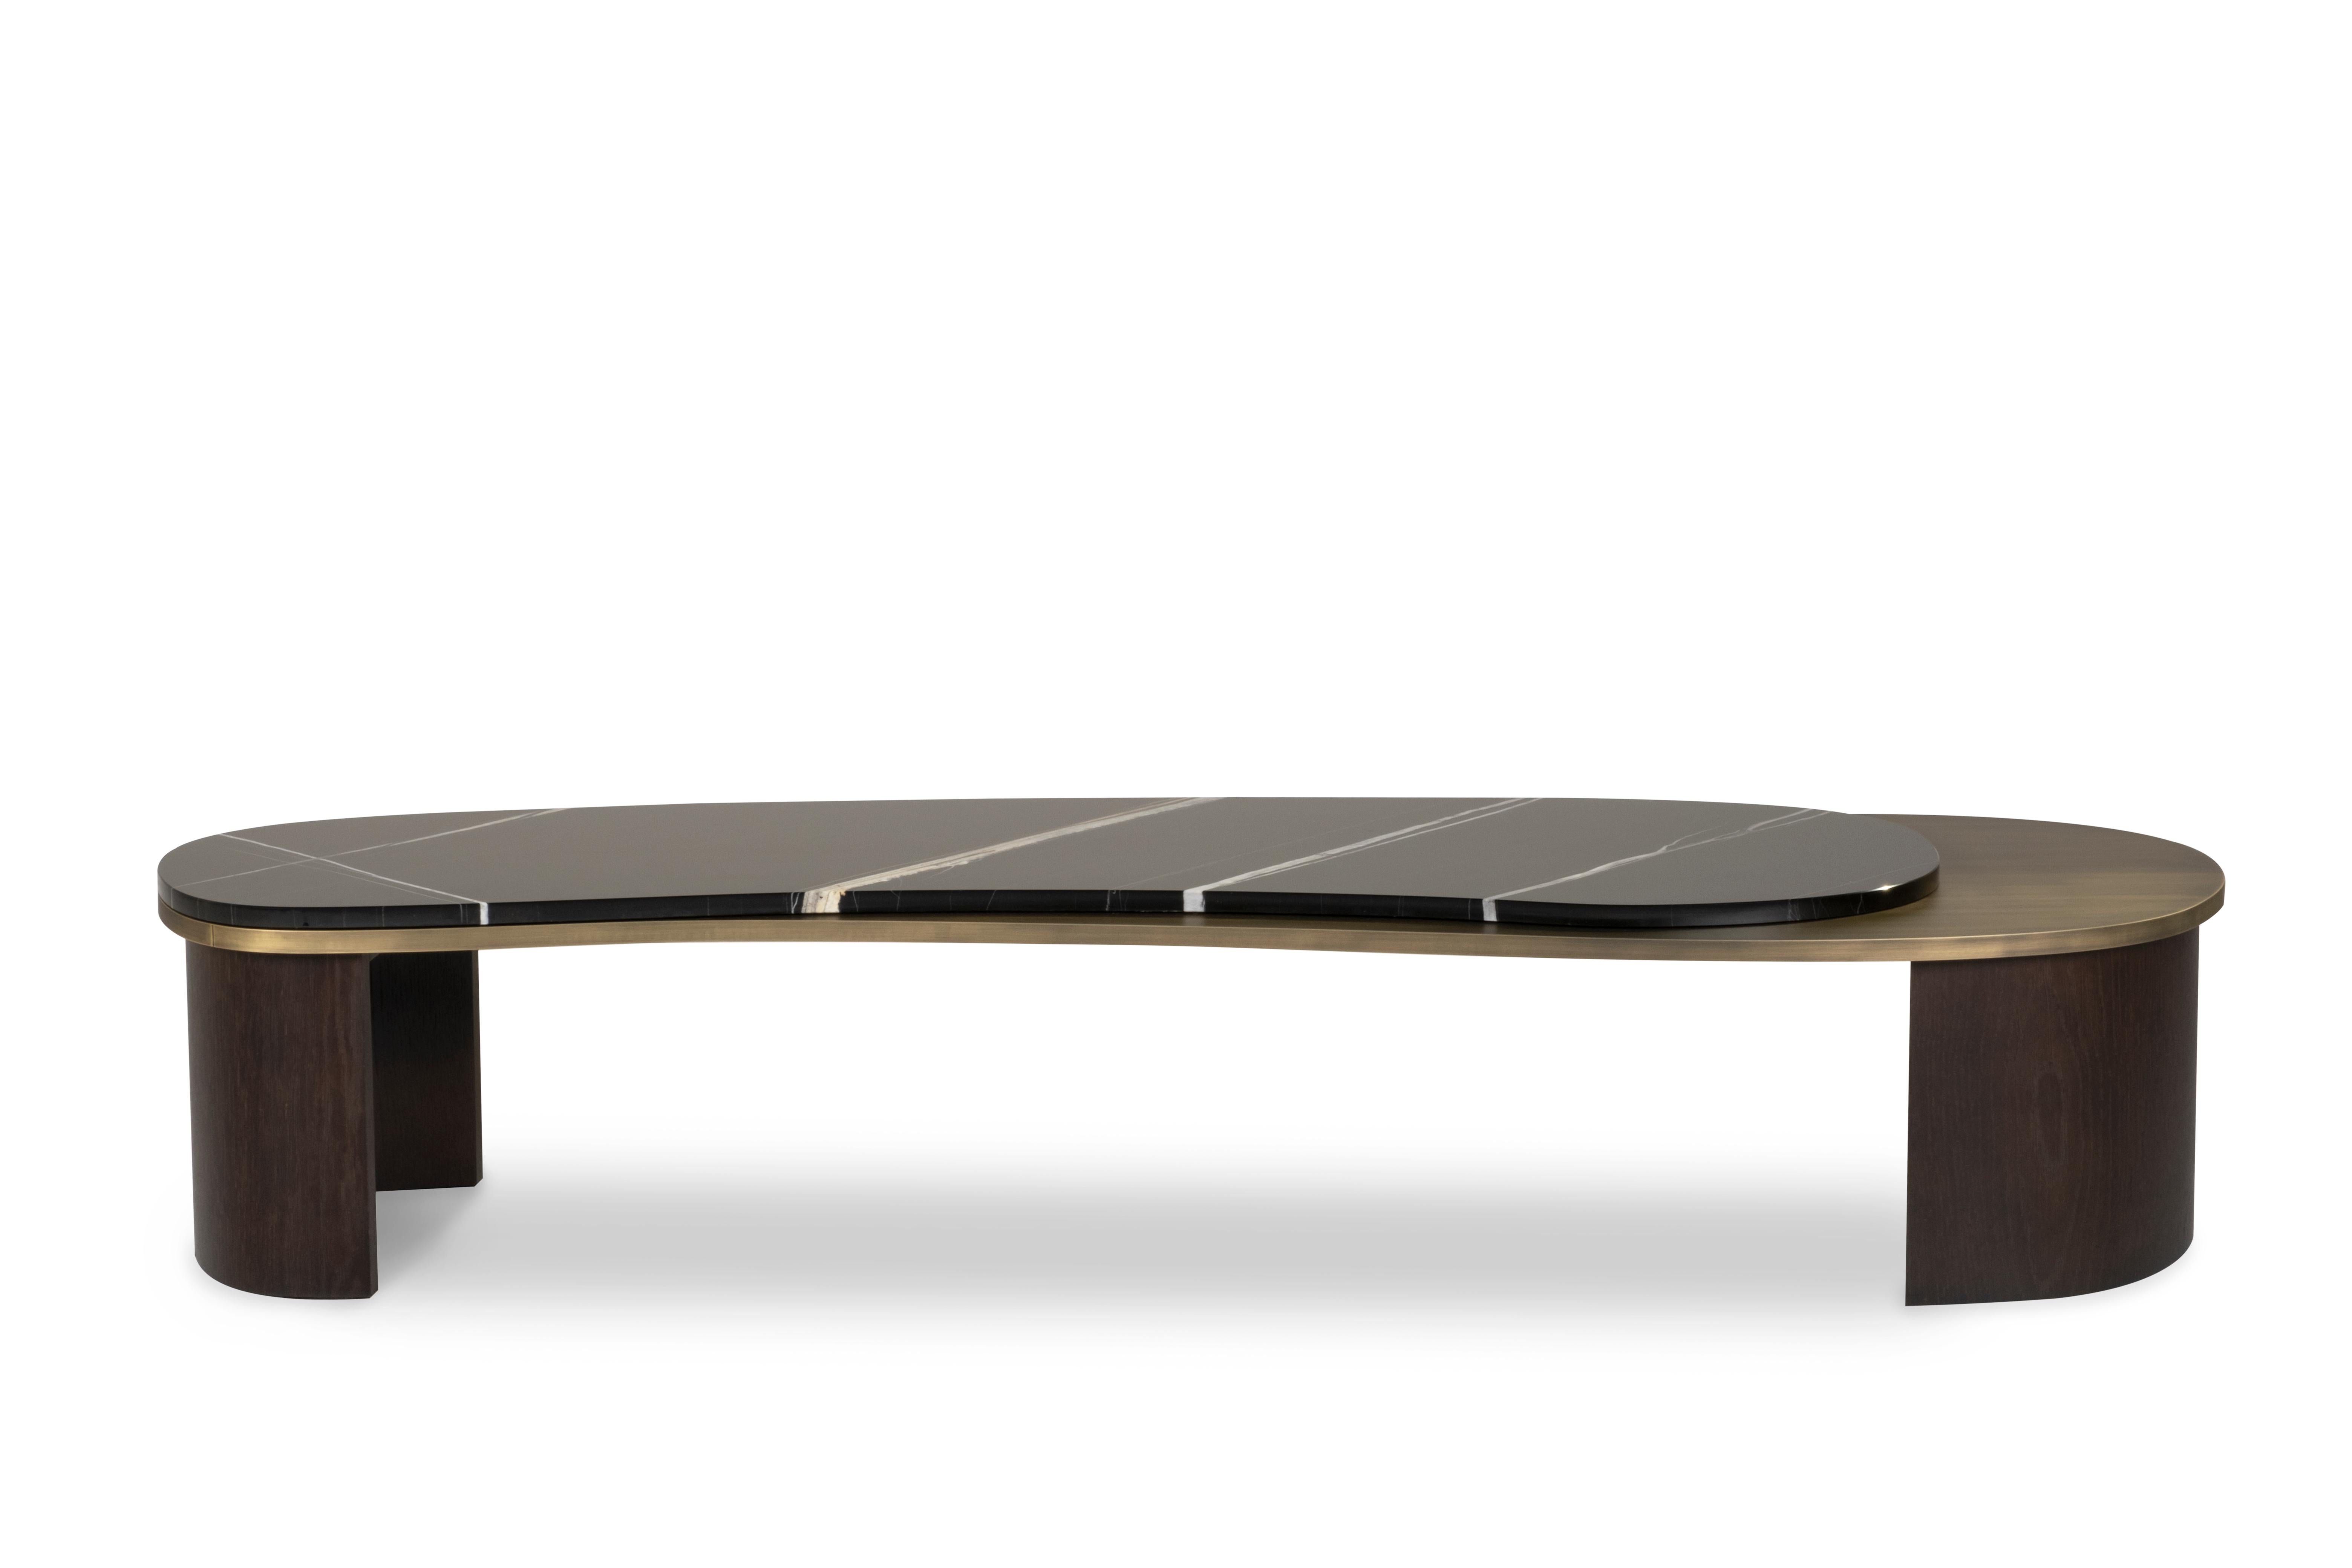 Armona Coffee Table, Contemporary Collection, Handcrafted in Portugal - Europe by Greenapple.

Designed by Rute Martins for the Contemporary Collection, the Armona modern coffee table pays homage to the natural beauty and organic lines of Armona